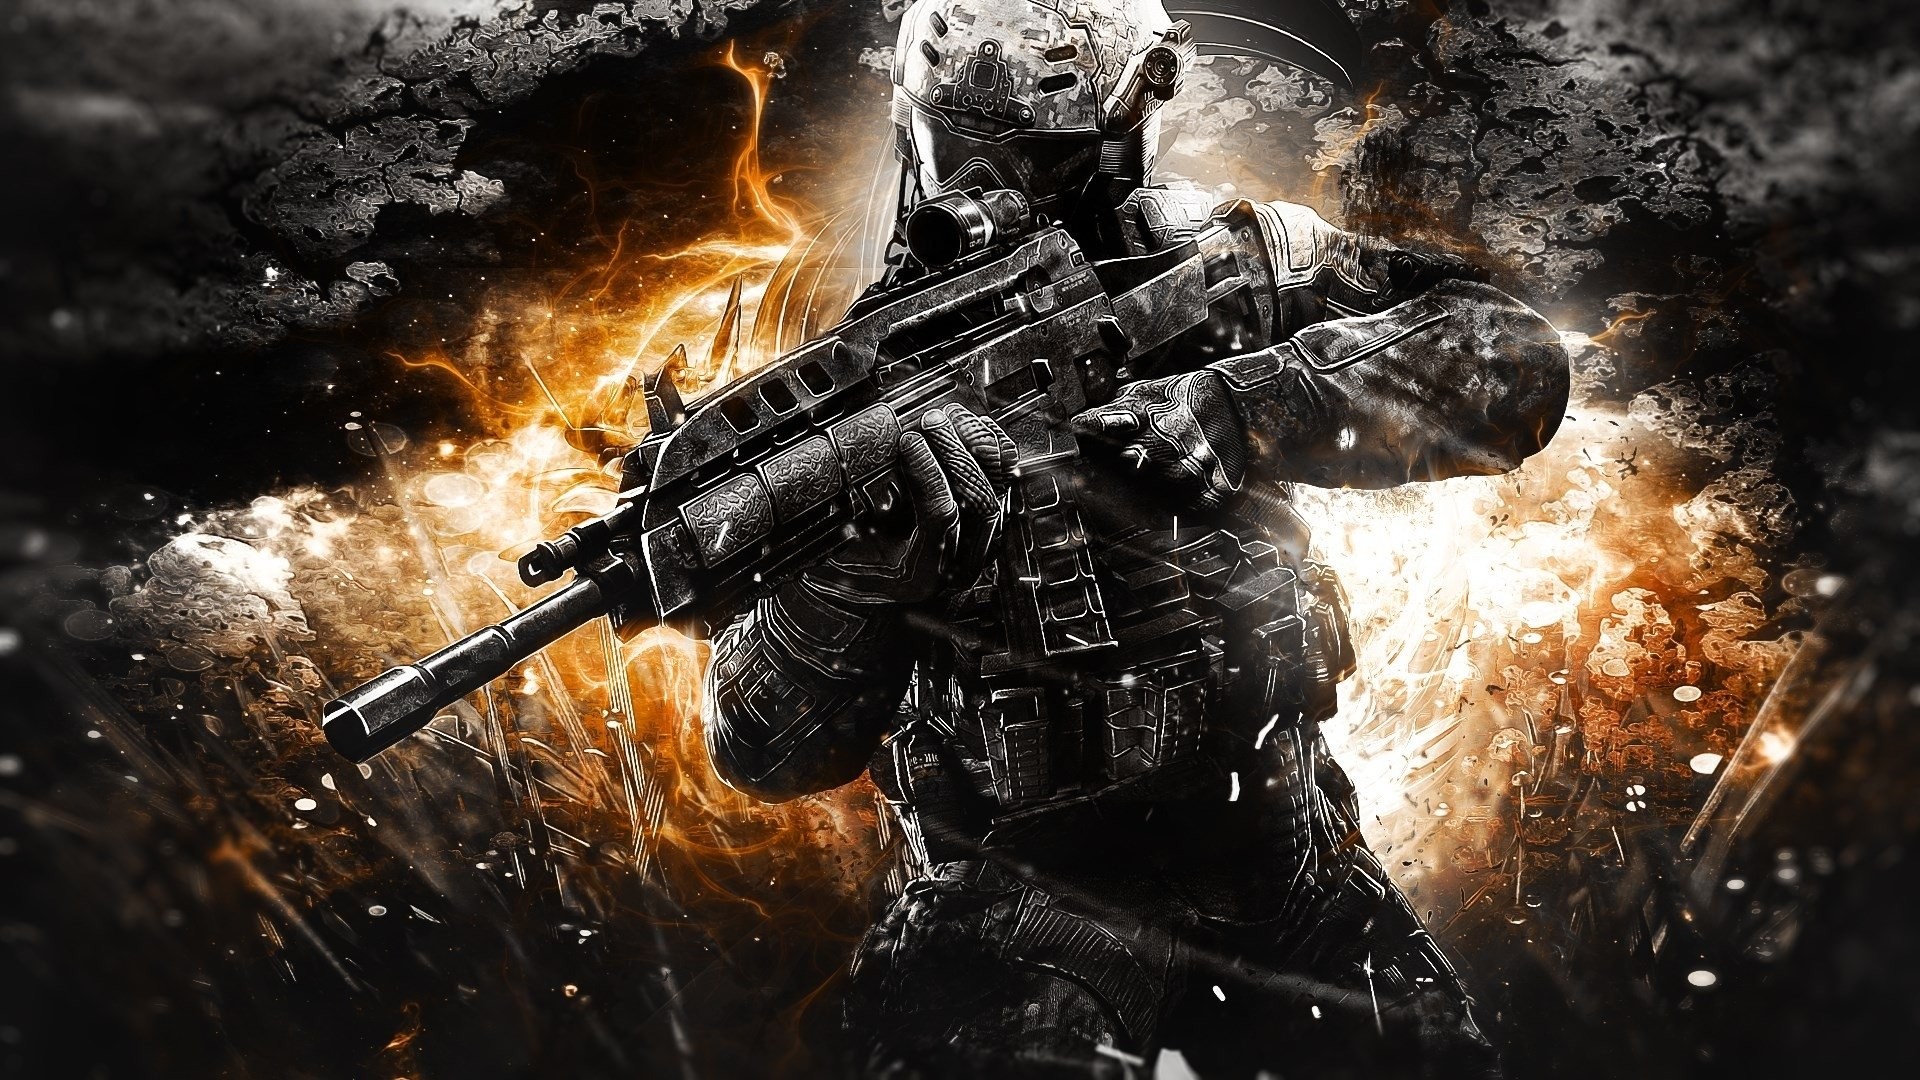 Call Of Duty Wallpapers Black Ops 2 Wallpapers) – HD Wallpapers